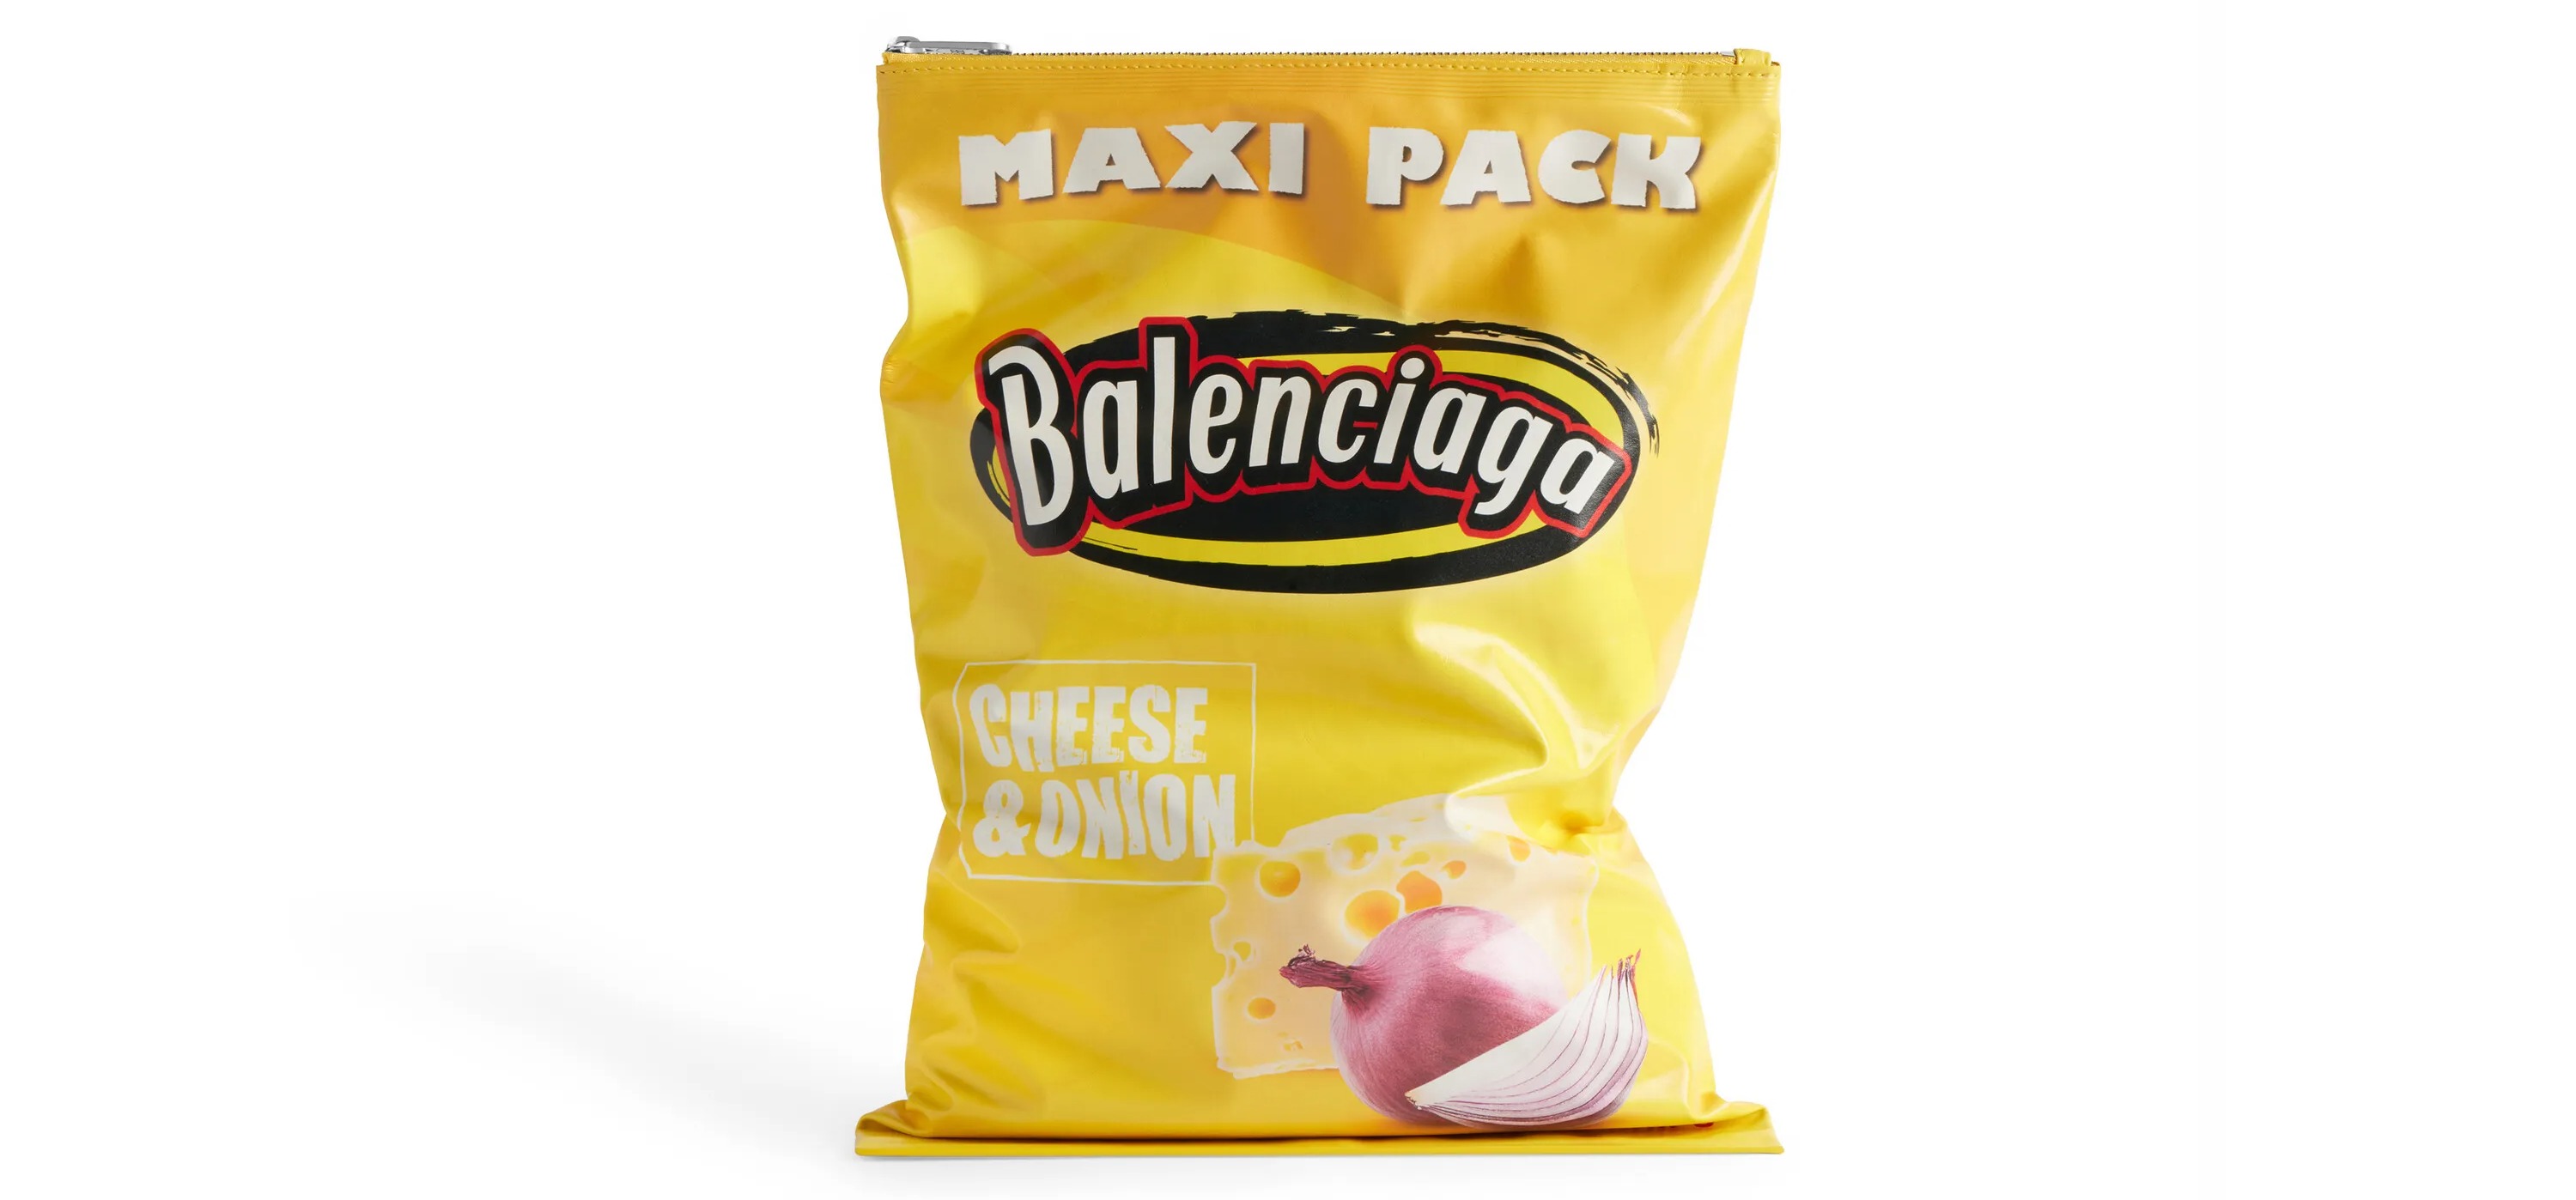 Balenciaga is selling a leather bag that looks like a giant packet of crisps